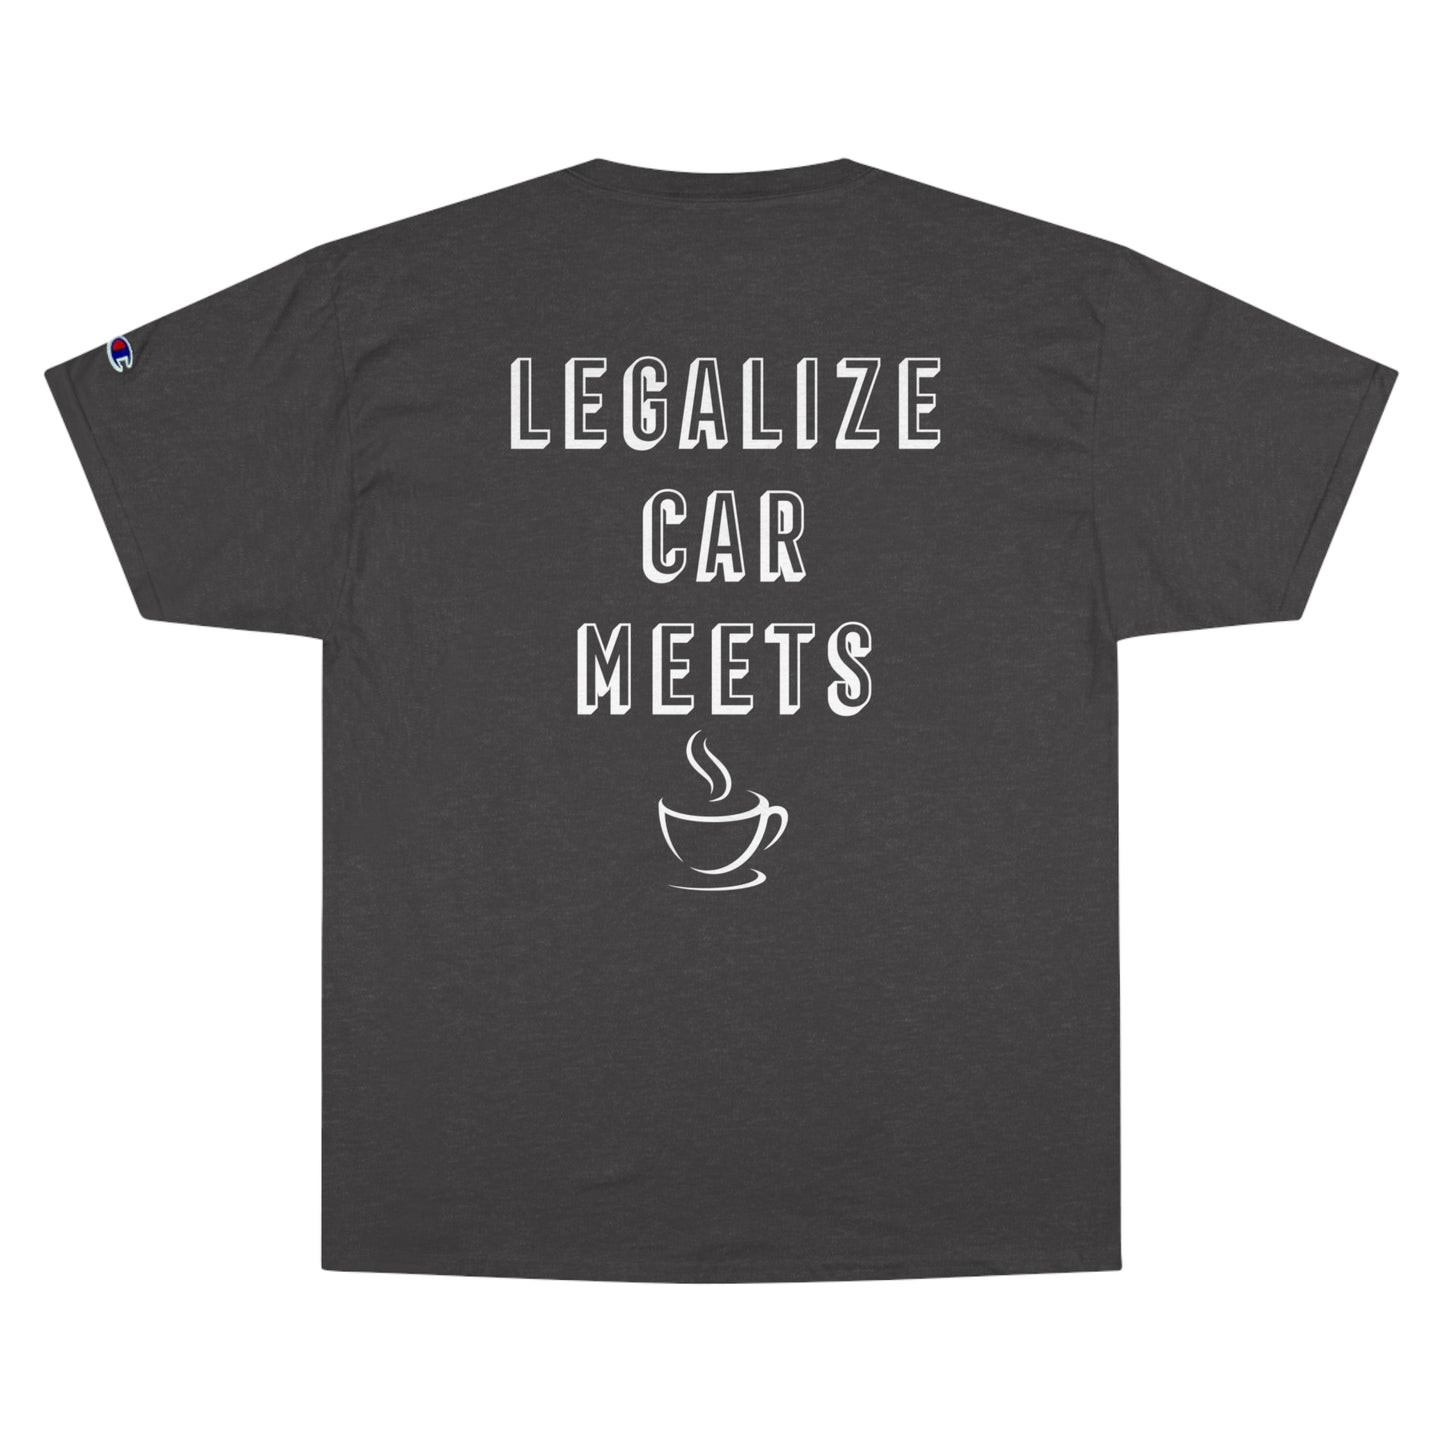 NYCars & Coffee "Legalize Car Meets" - Champion Tee